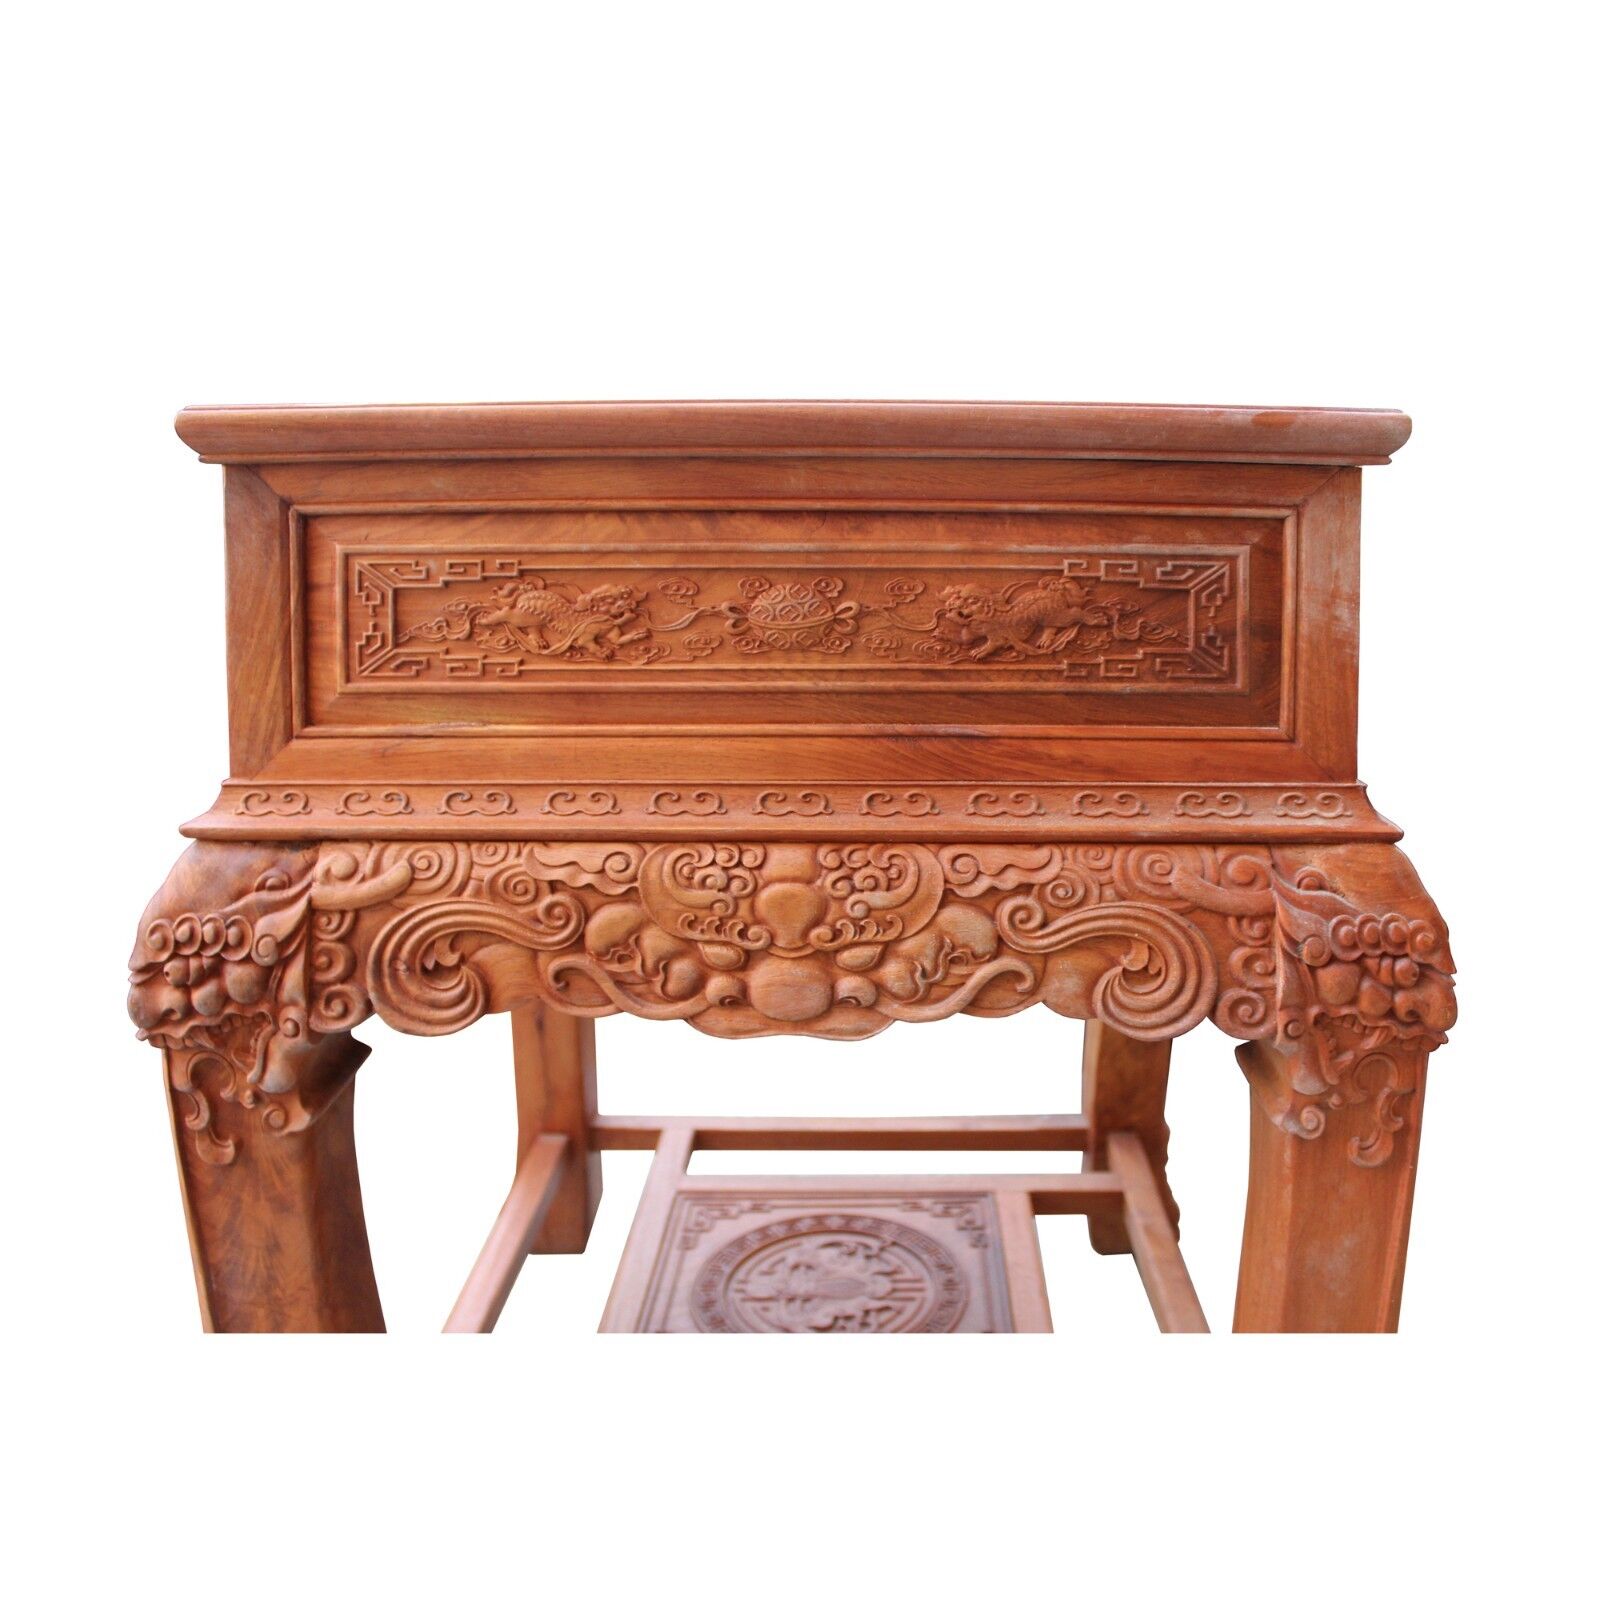 Chinese Oriental Huali Rosewood Foo Dogs Motif Tea Table Stand cs4529 Handmade Does Not Apply - фотография #6